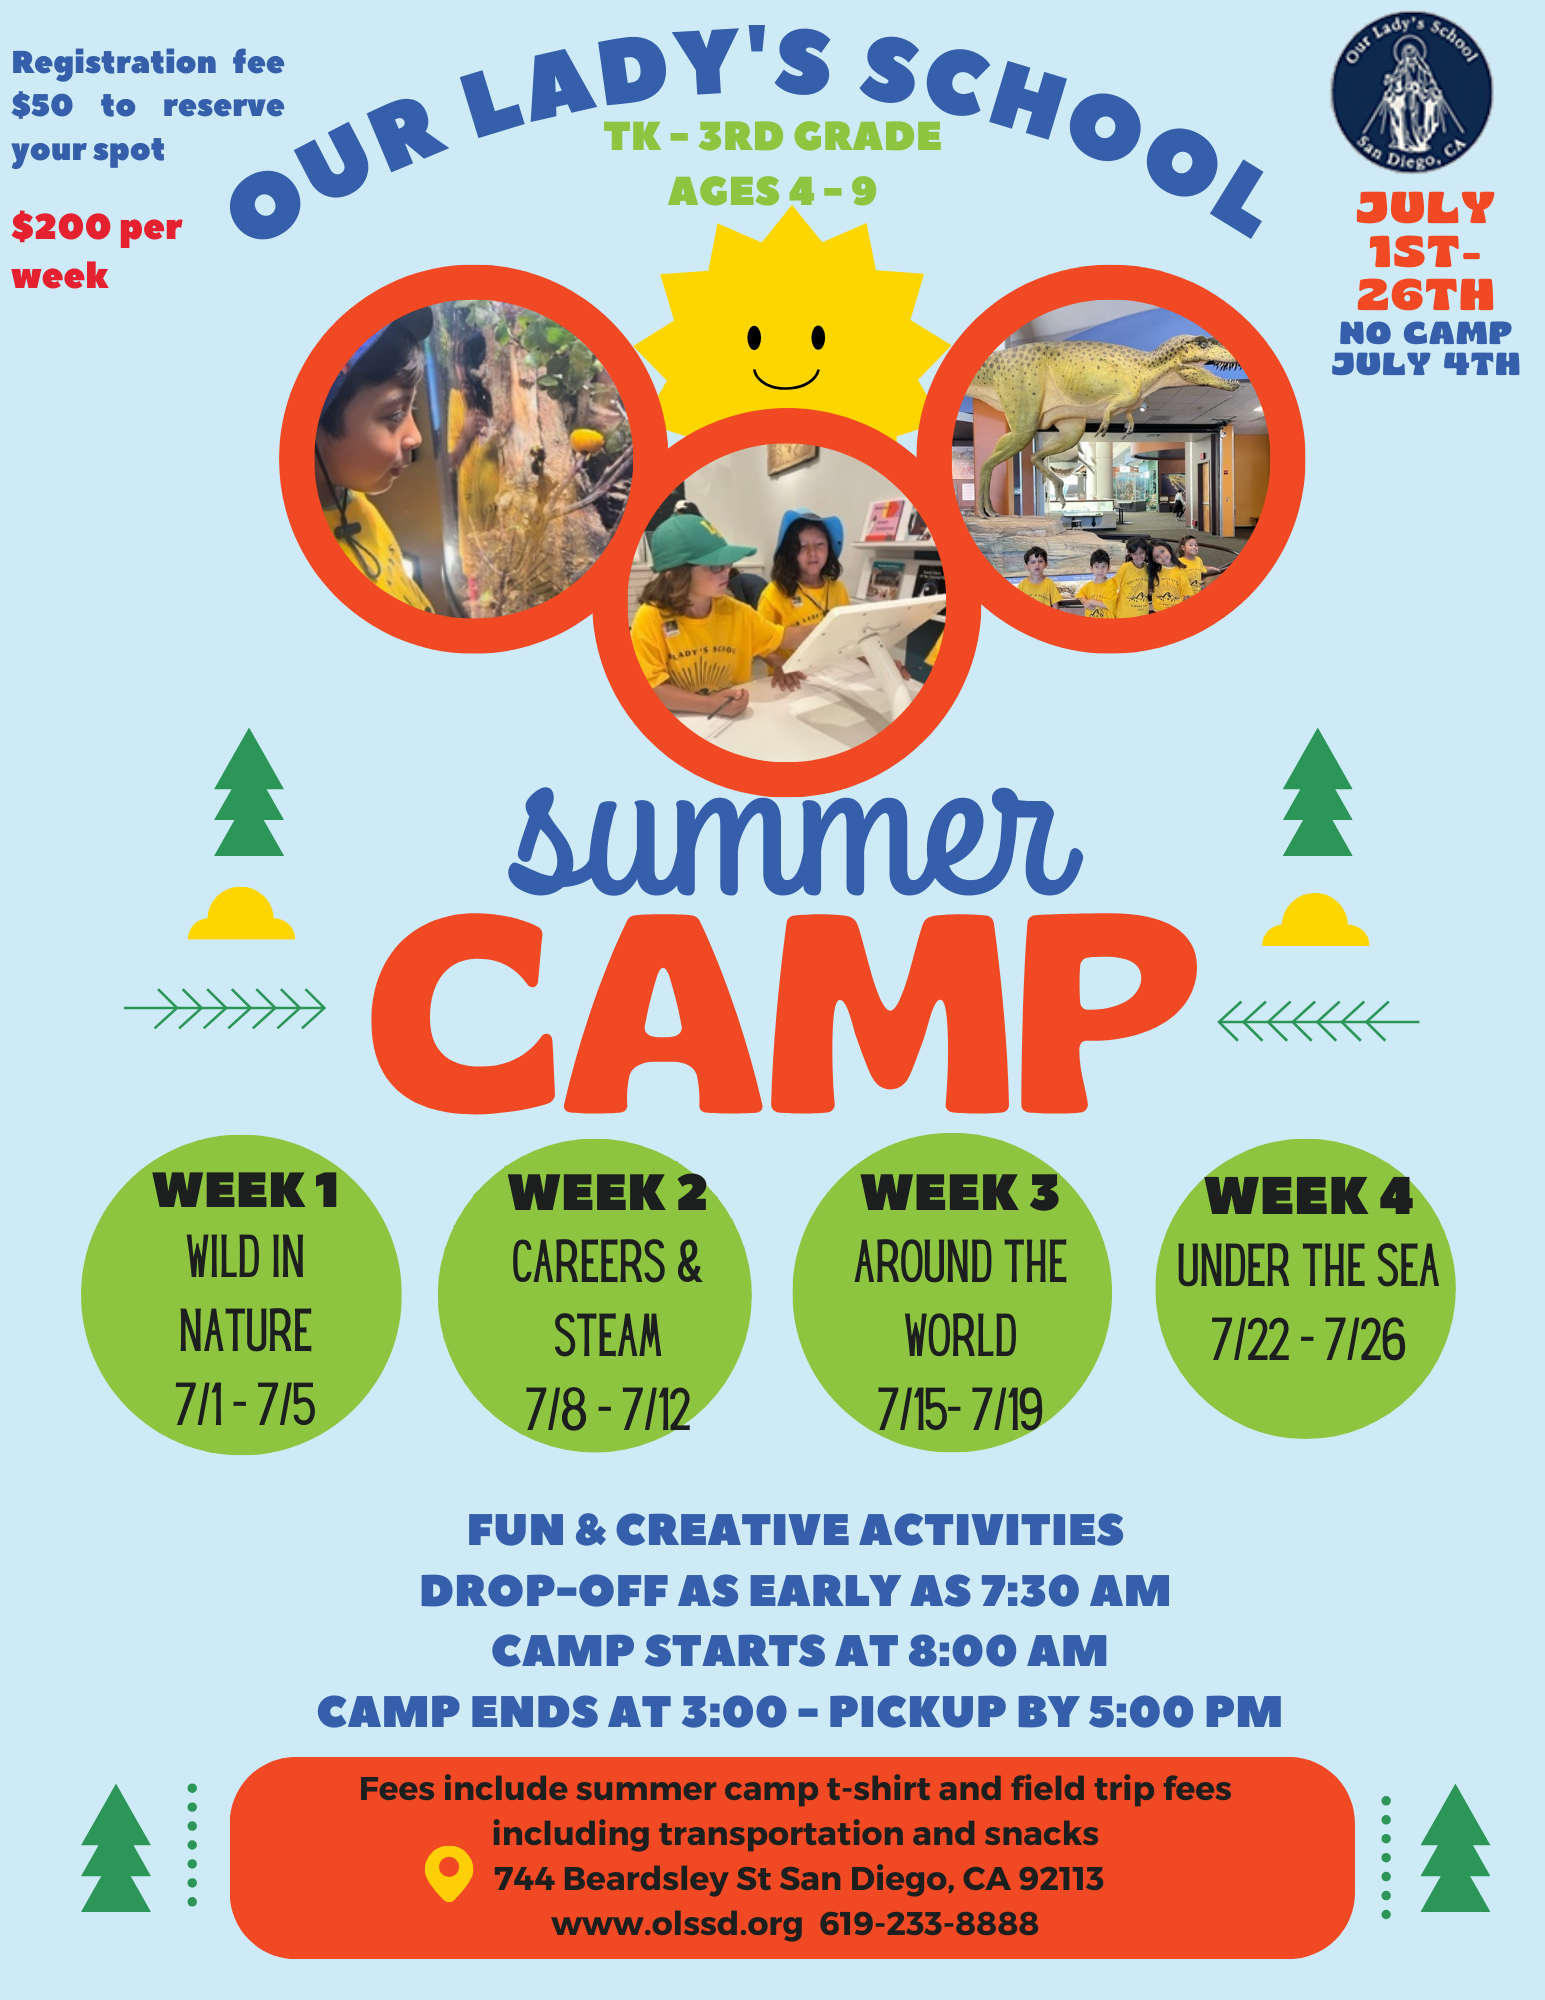 Our Lady's School Summer Camp Flyer